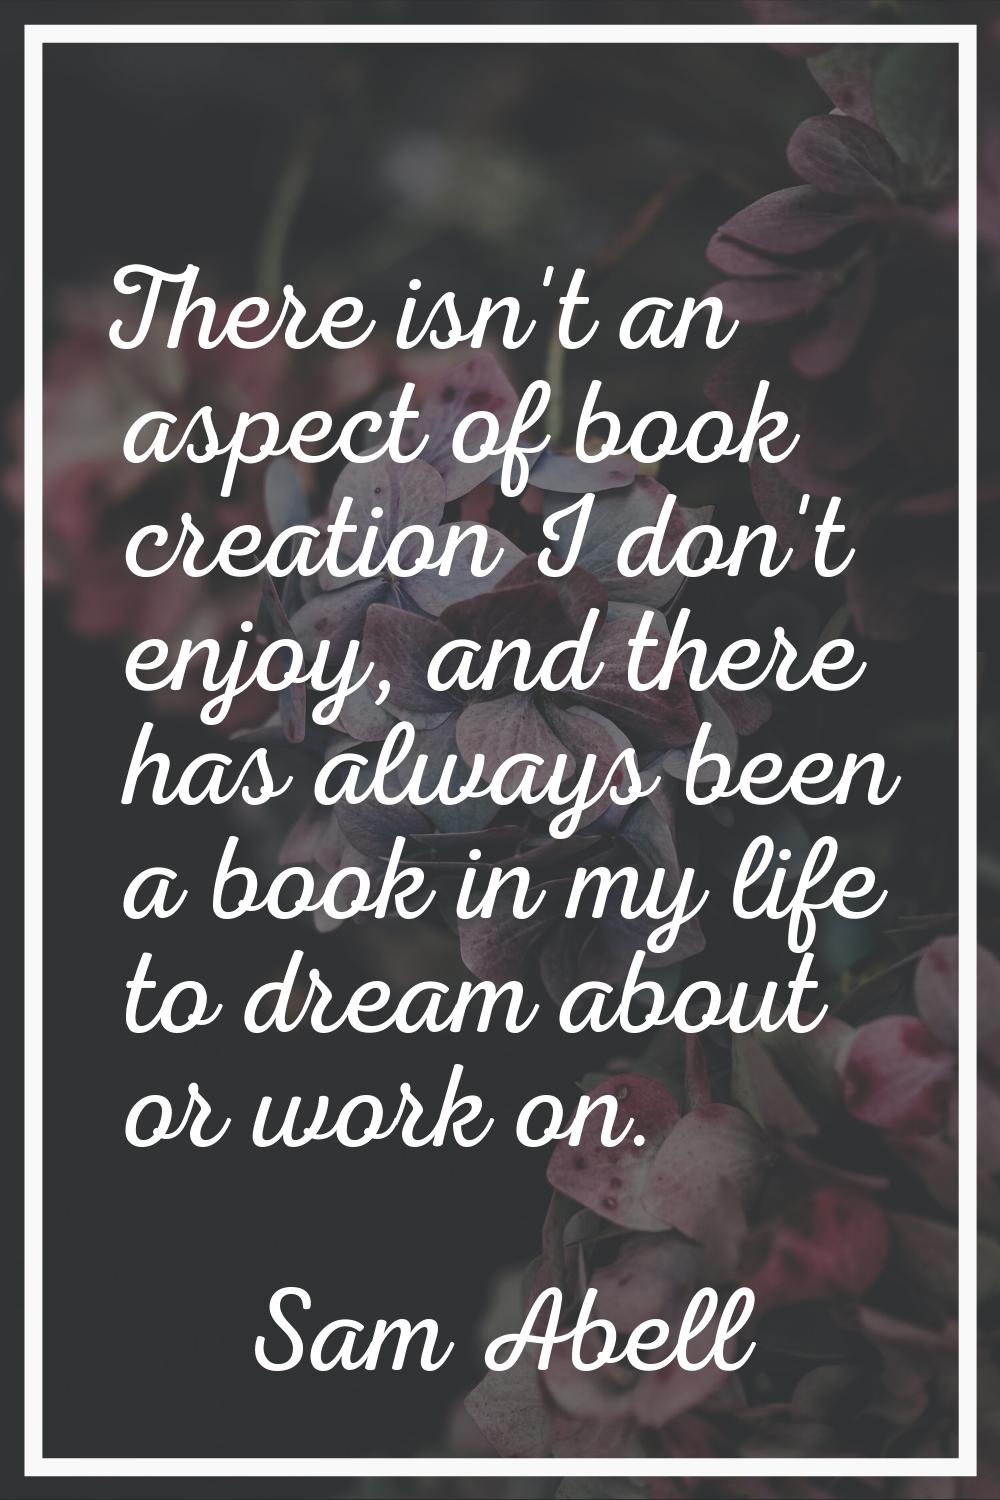 There isn't an aspect of book creation I don't enjoy, and there has always been a book in my life t